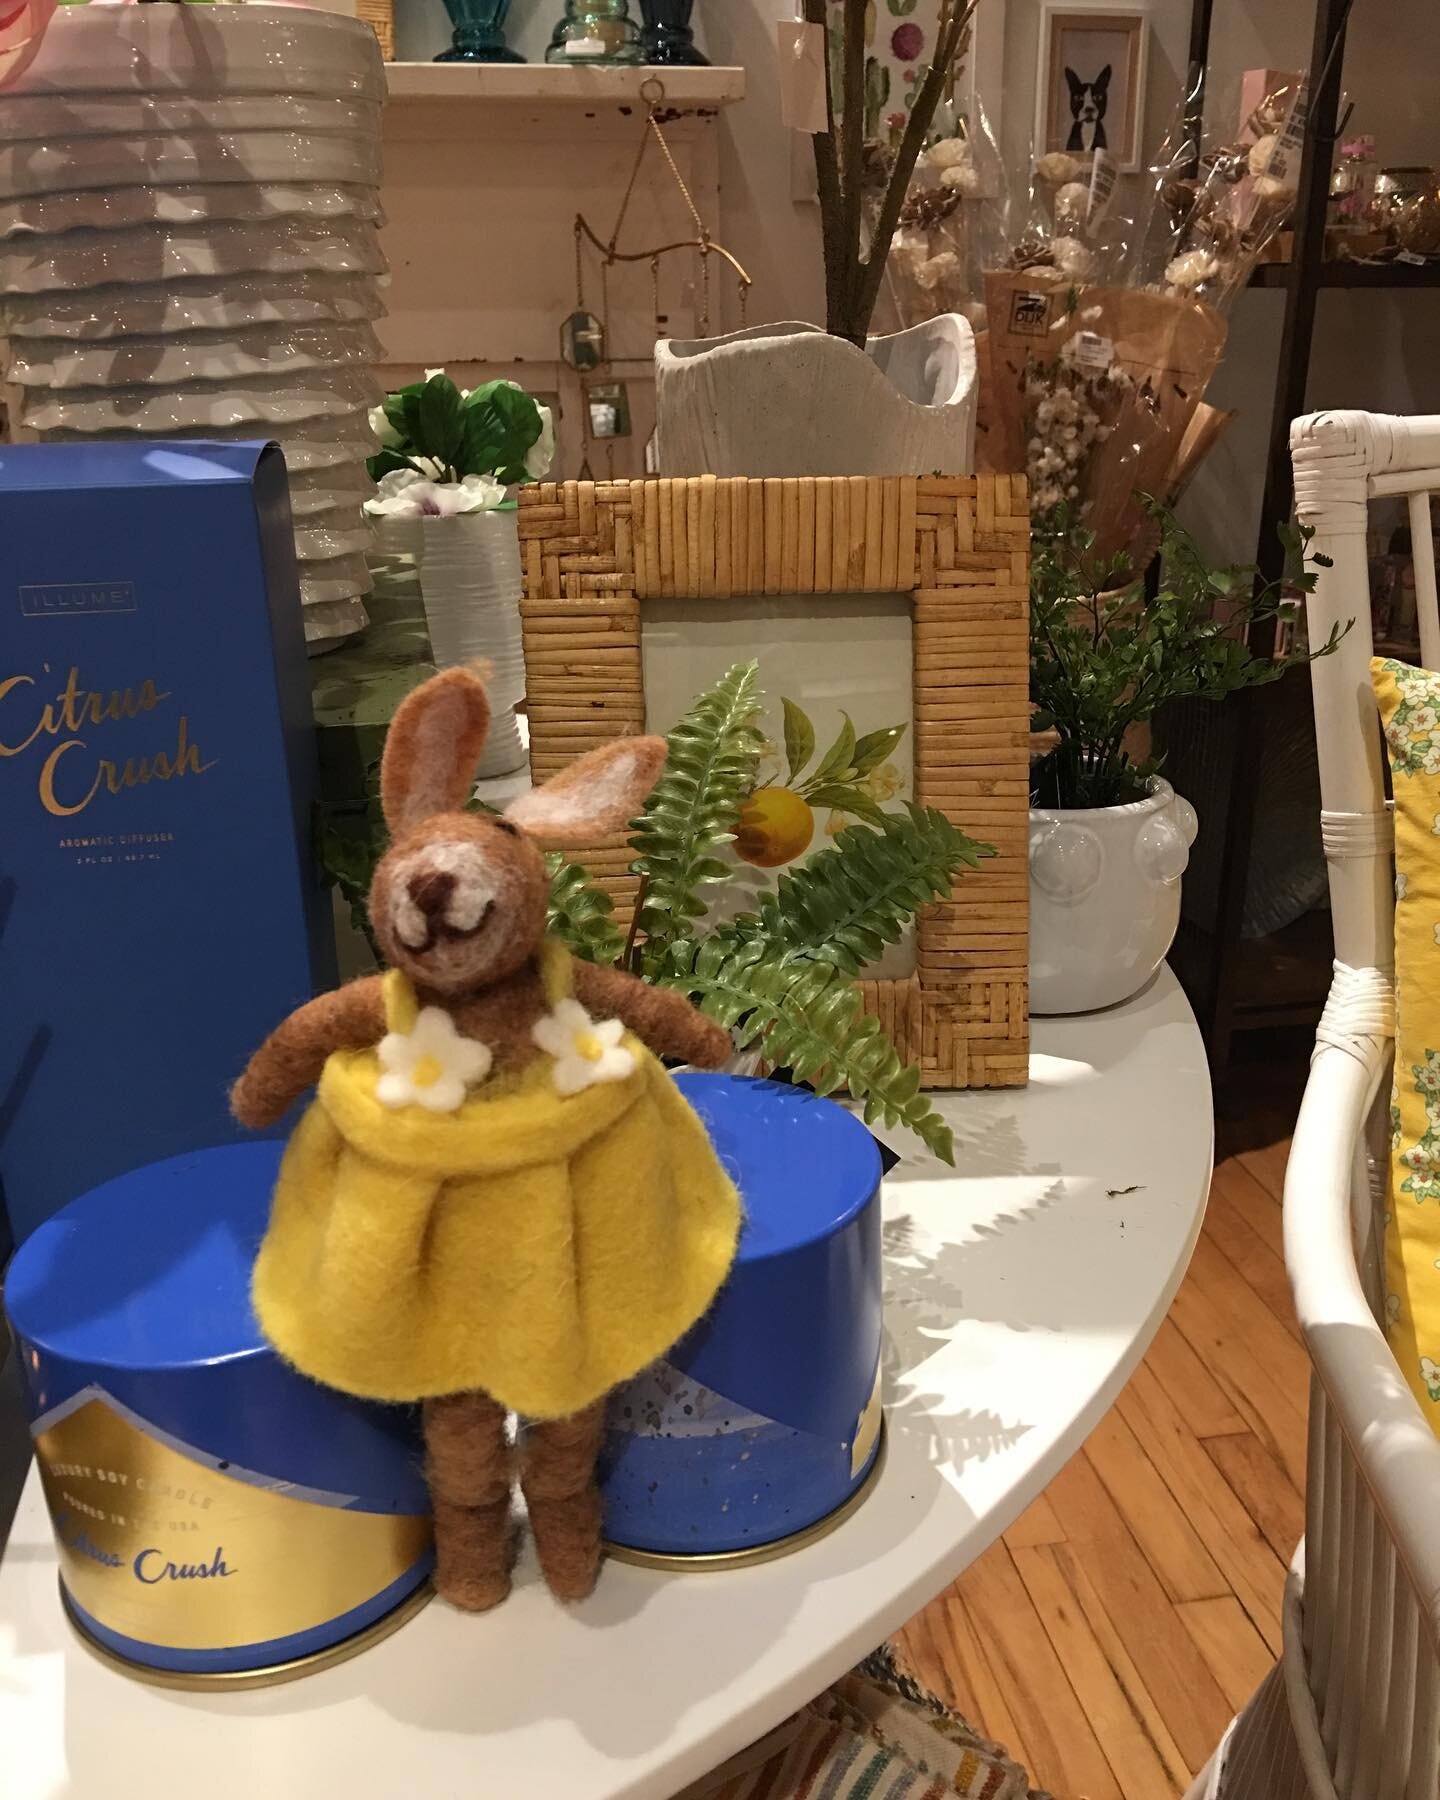 SomeBUNNY is excited for spring!
.
.
.
.

#stylepost #post #shoplocal #rva #stylepostdesign #richmond #richmondexperience #local #shoprva #smallbusiness #supportsmall #shopsat5807 @shopsat5807